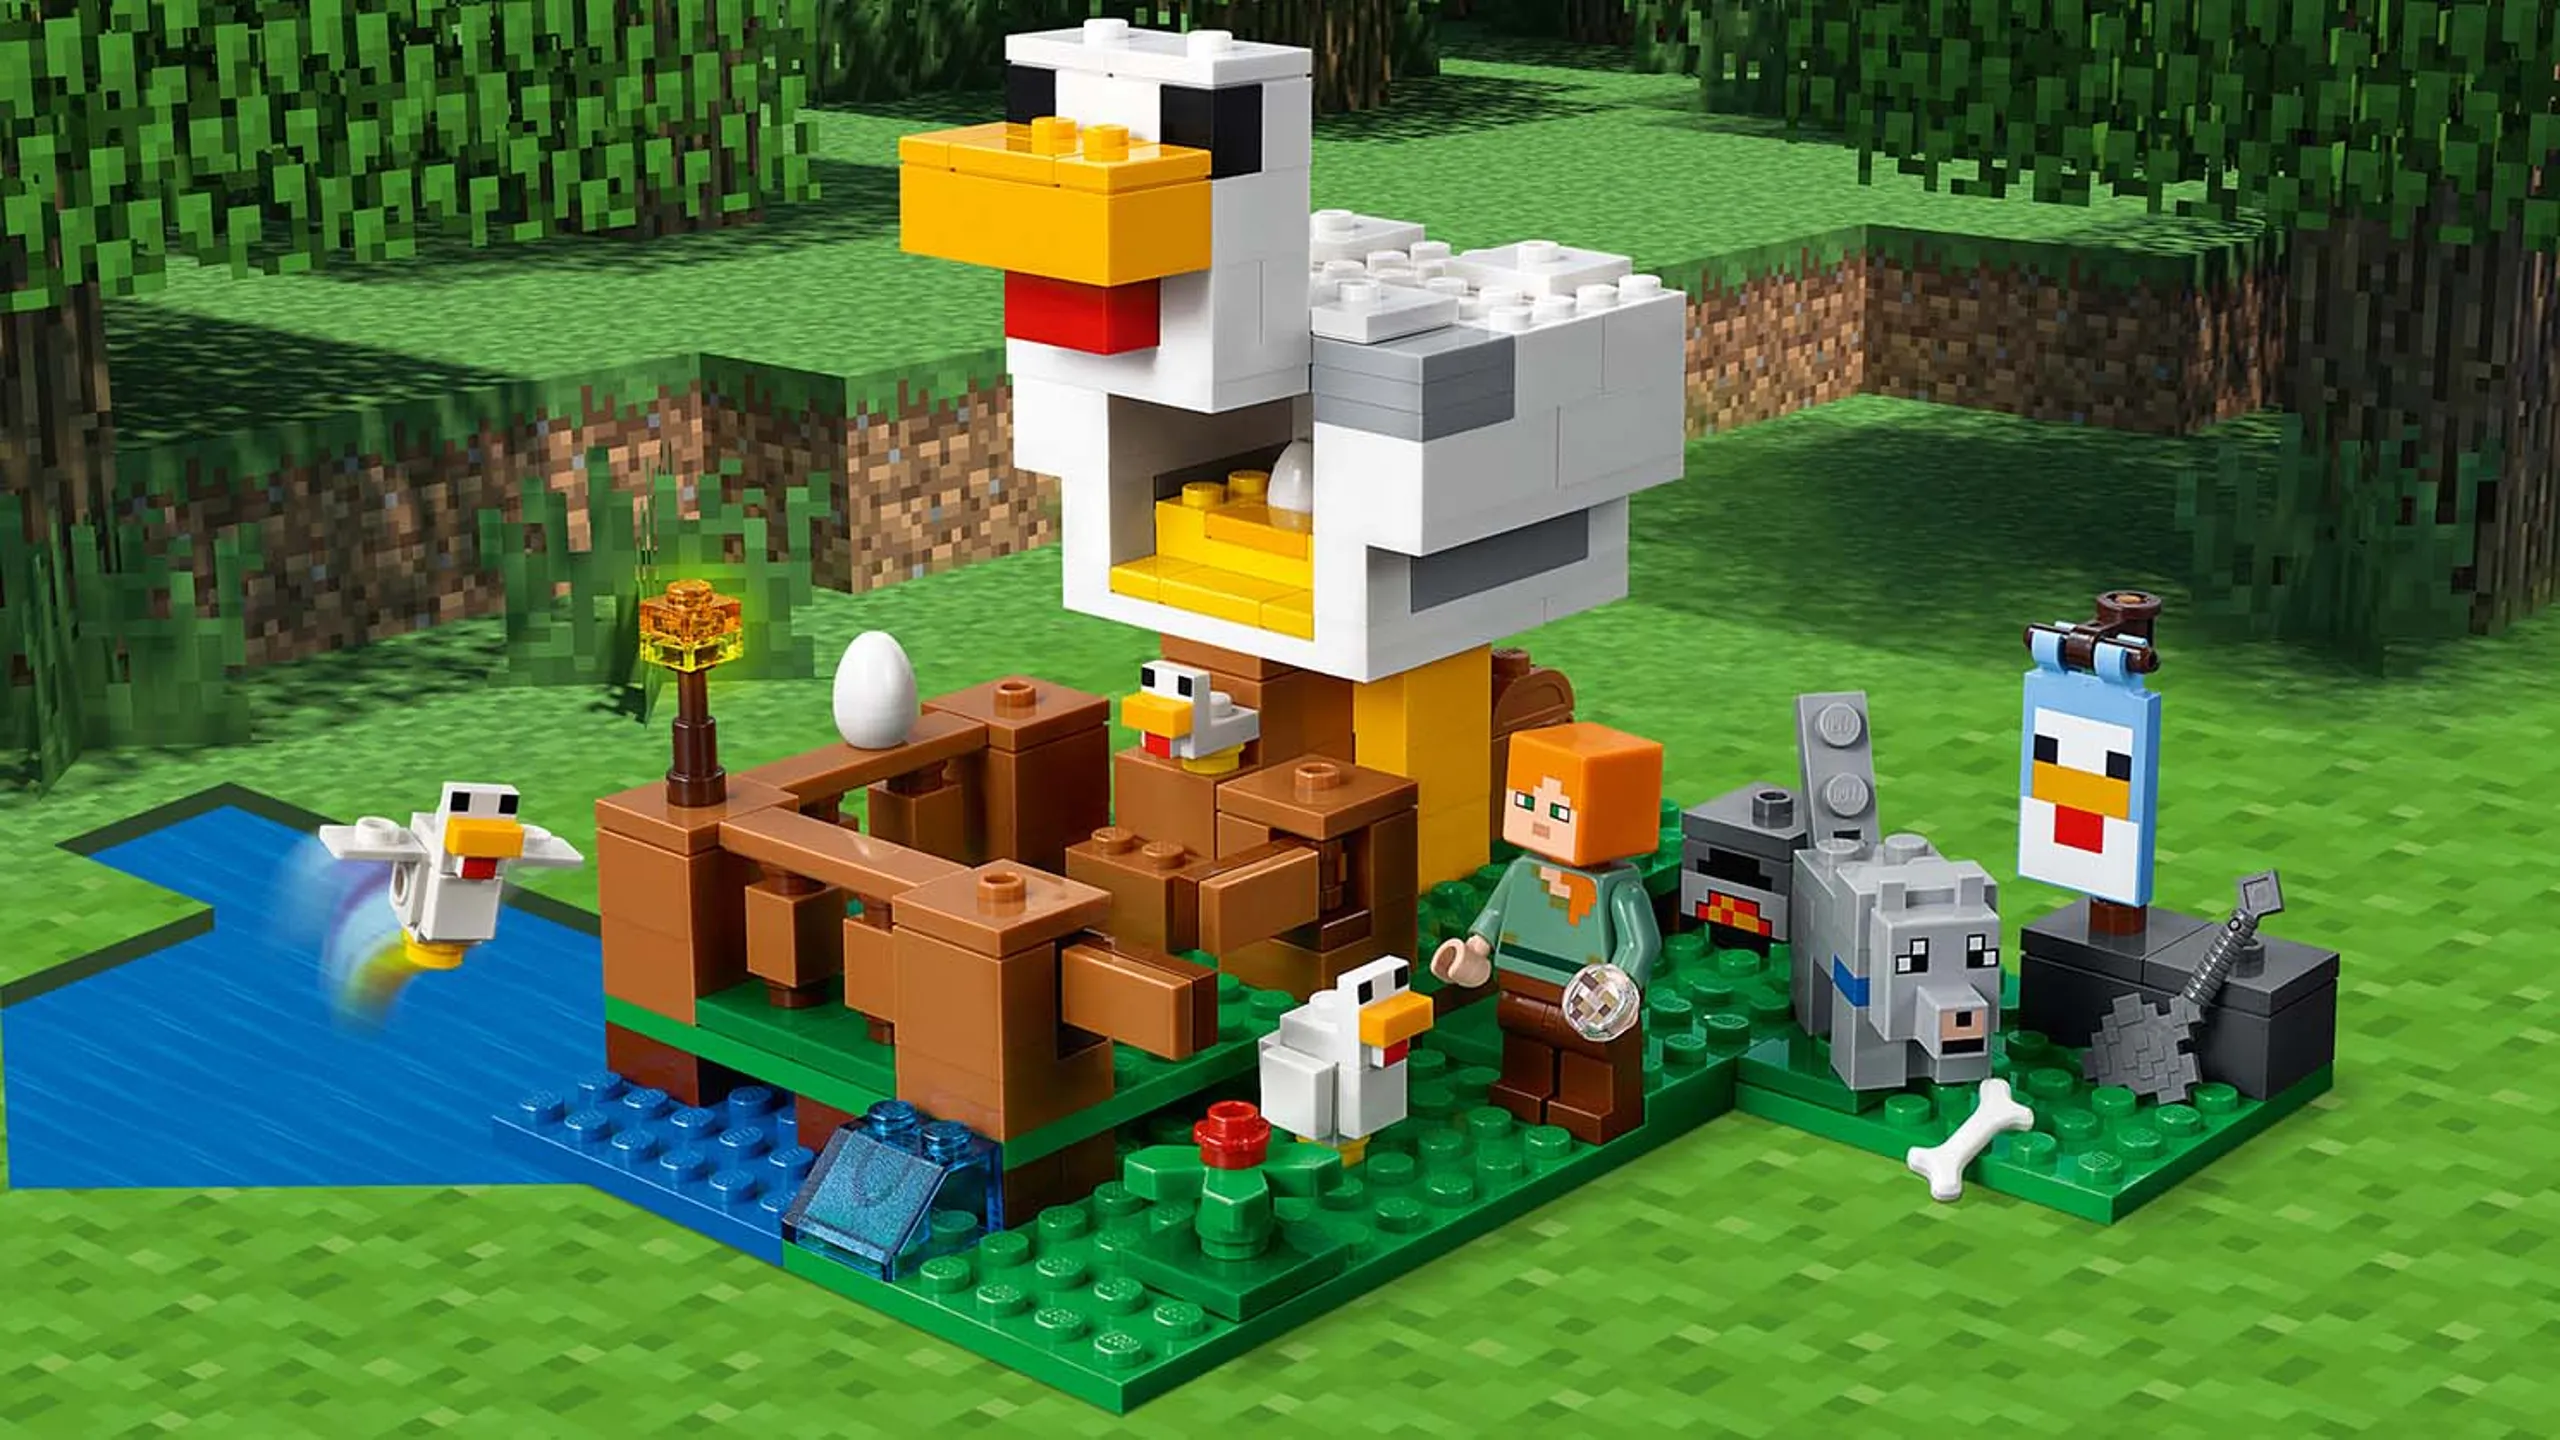 LEGO Minecraft - 21140 The Chicken Coop - Alex lets the chicken out of the pen and henhouse so he can go in and collect the eggs while the wolf waits outside is tamed with a bone.